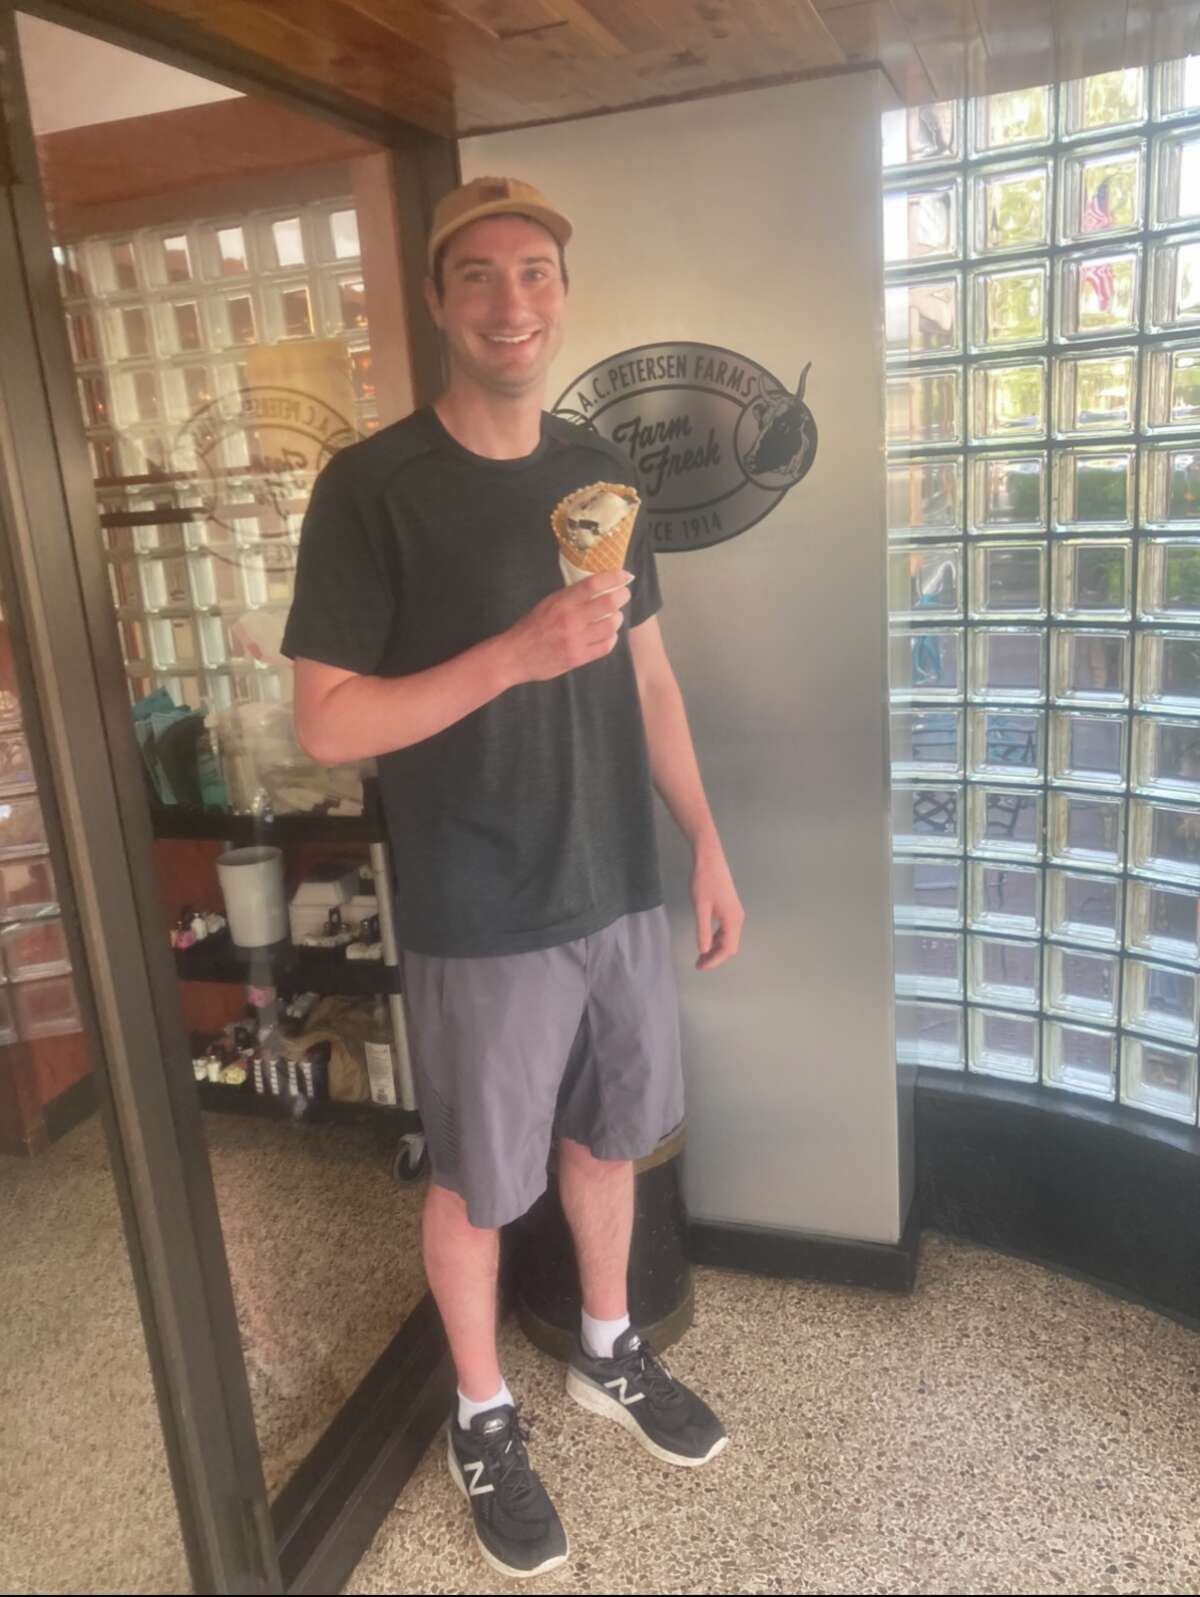 Zack Goldman spent the duration of the COVID-19 pandemic traveling around Connecticut to taste test local homemade ice cream. He published a spreadsheet of his personal rankings on Reddit in July 2021.